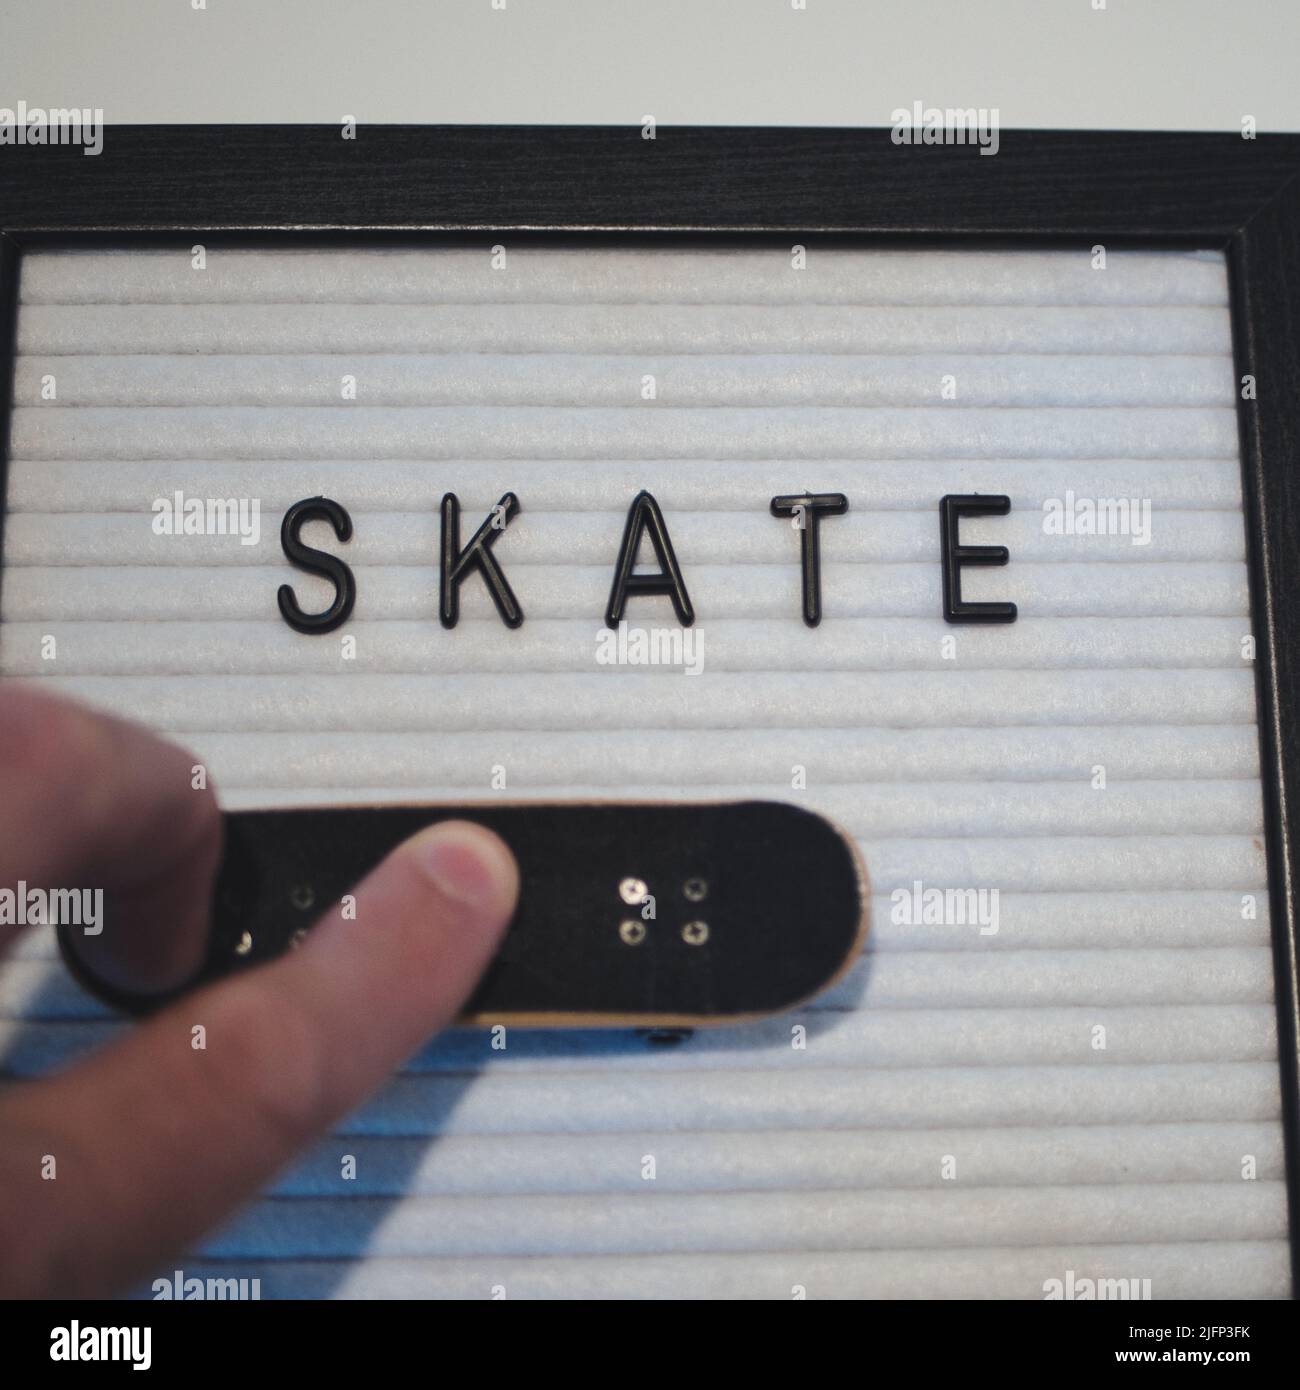 Skate in black text. Professional fingerboard expert about to do a 360 kickflip (tre flip). Fun graphic to illustrate skateboarding in a royalty free Stock Photo